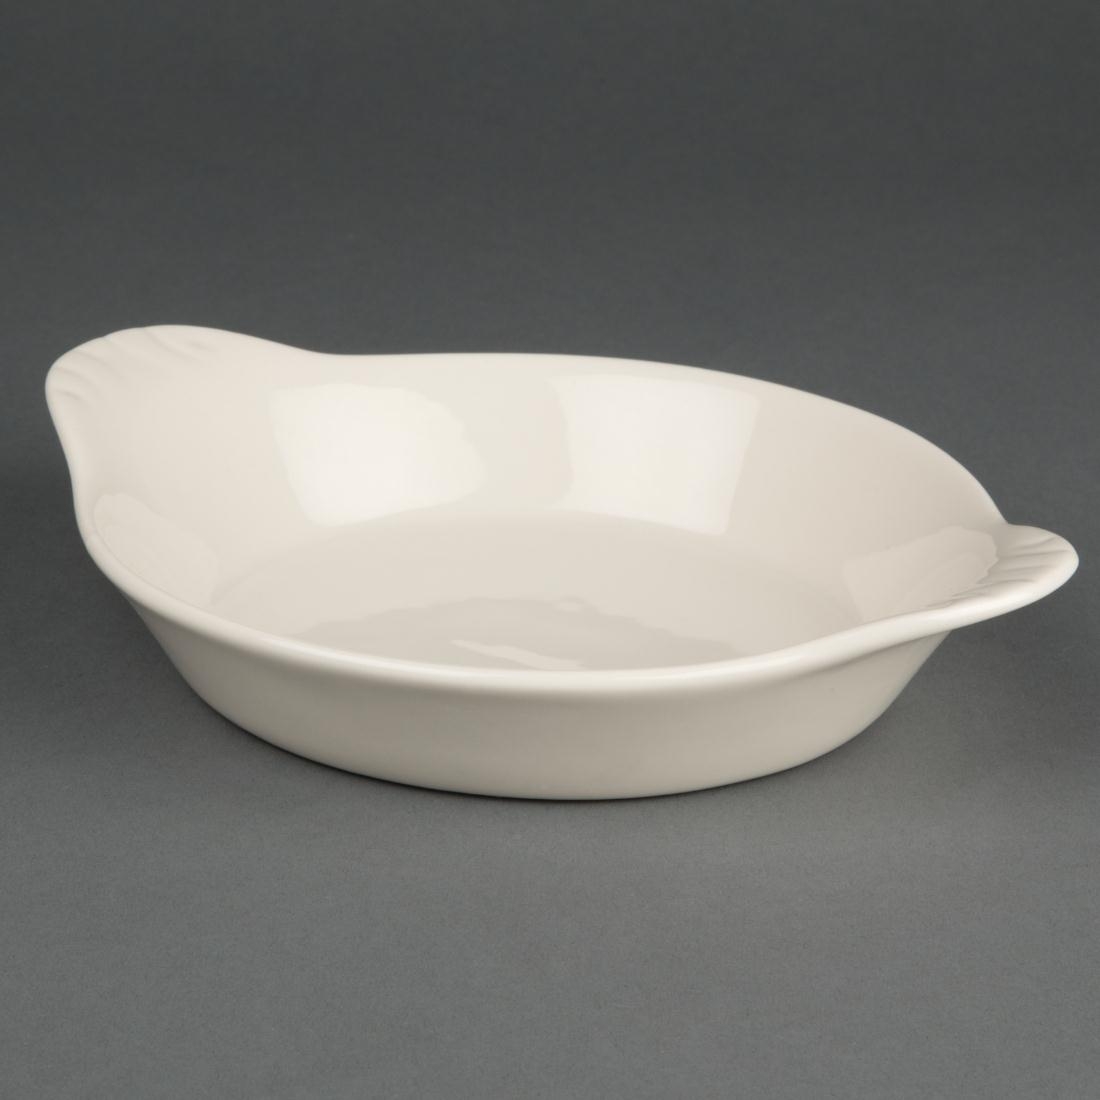 Olympia Ivory Round Eared Dishes 160mm